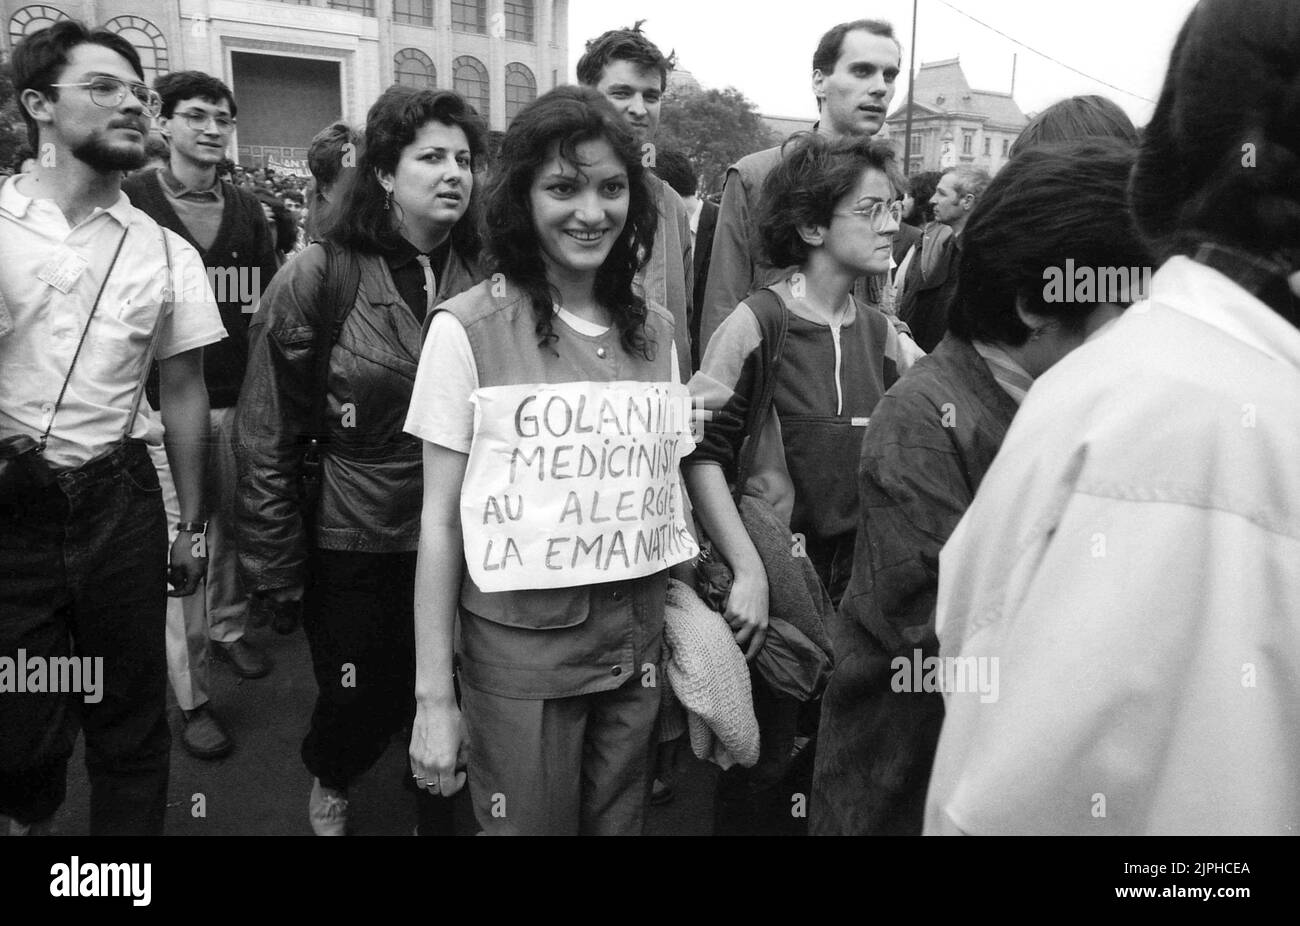 Bucharest, Romania, April 1990. 'Golaniada', a major anti-communism protest  in the University Square following the Romanian Revolution of 1989. People would gather daily to protest the ex-communists that grabbed the power after the Revolution. As president Iliescu called them 'golani' (hooligans), the protesters proudly adopted the term, and wore it as a badge. This woman is wearing a poster saying 'The hooligans studying Medicine are allergic to neocommunists '. Stock Photo